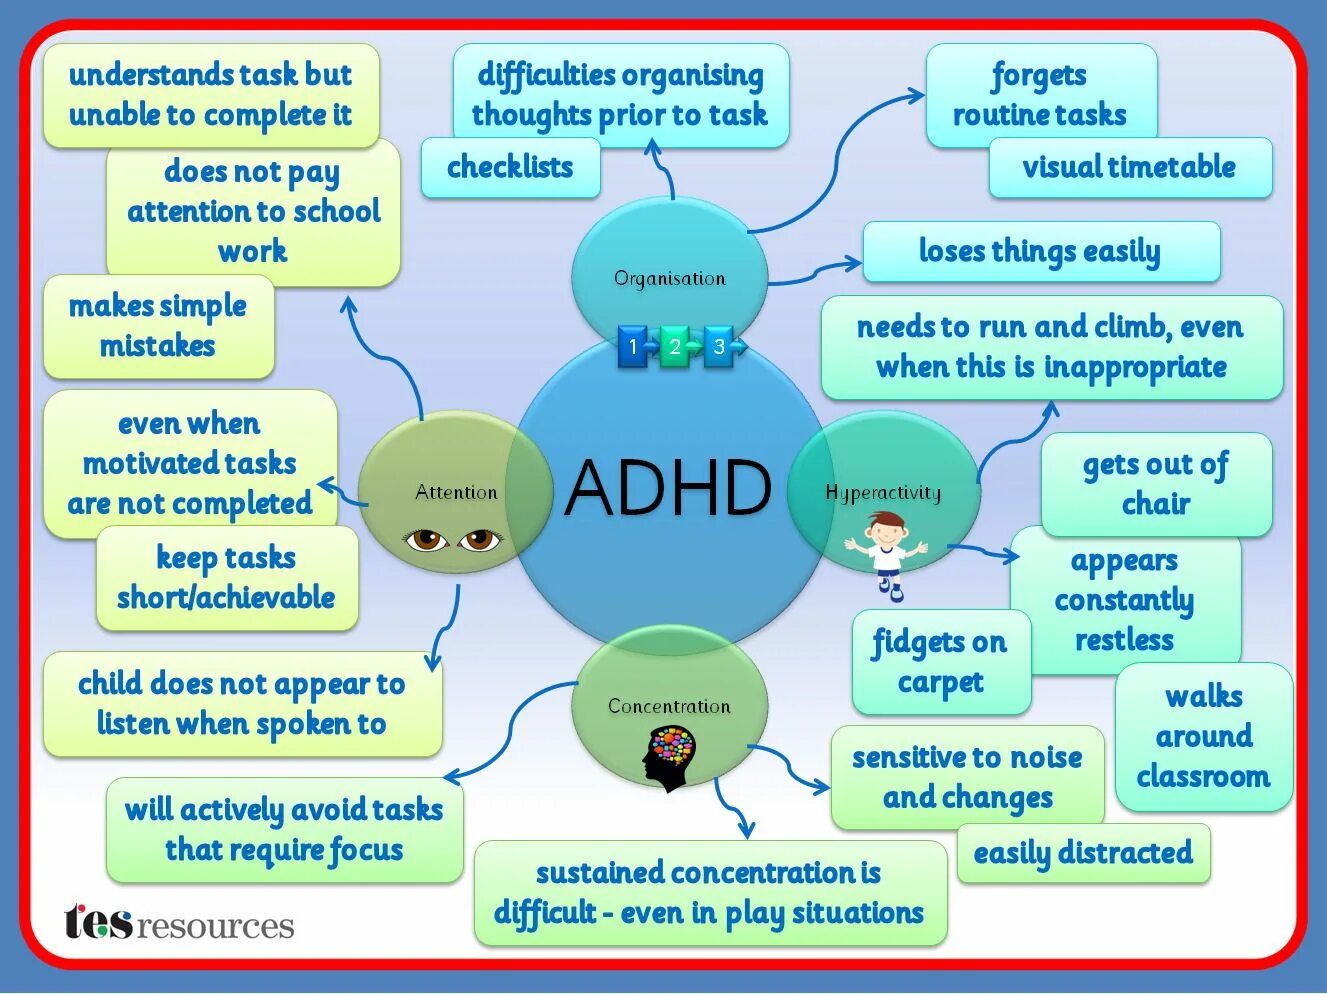 Attention-deficit/hyperactivity Disorder (ADHD). Add and ADHD. Визуал школьного проекта. Short attention.